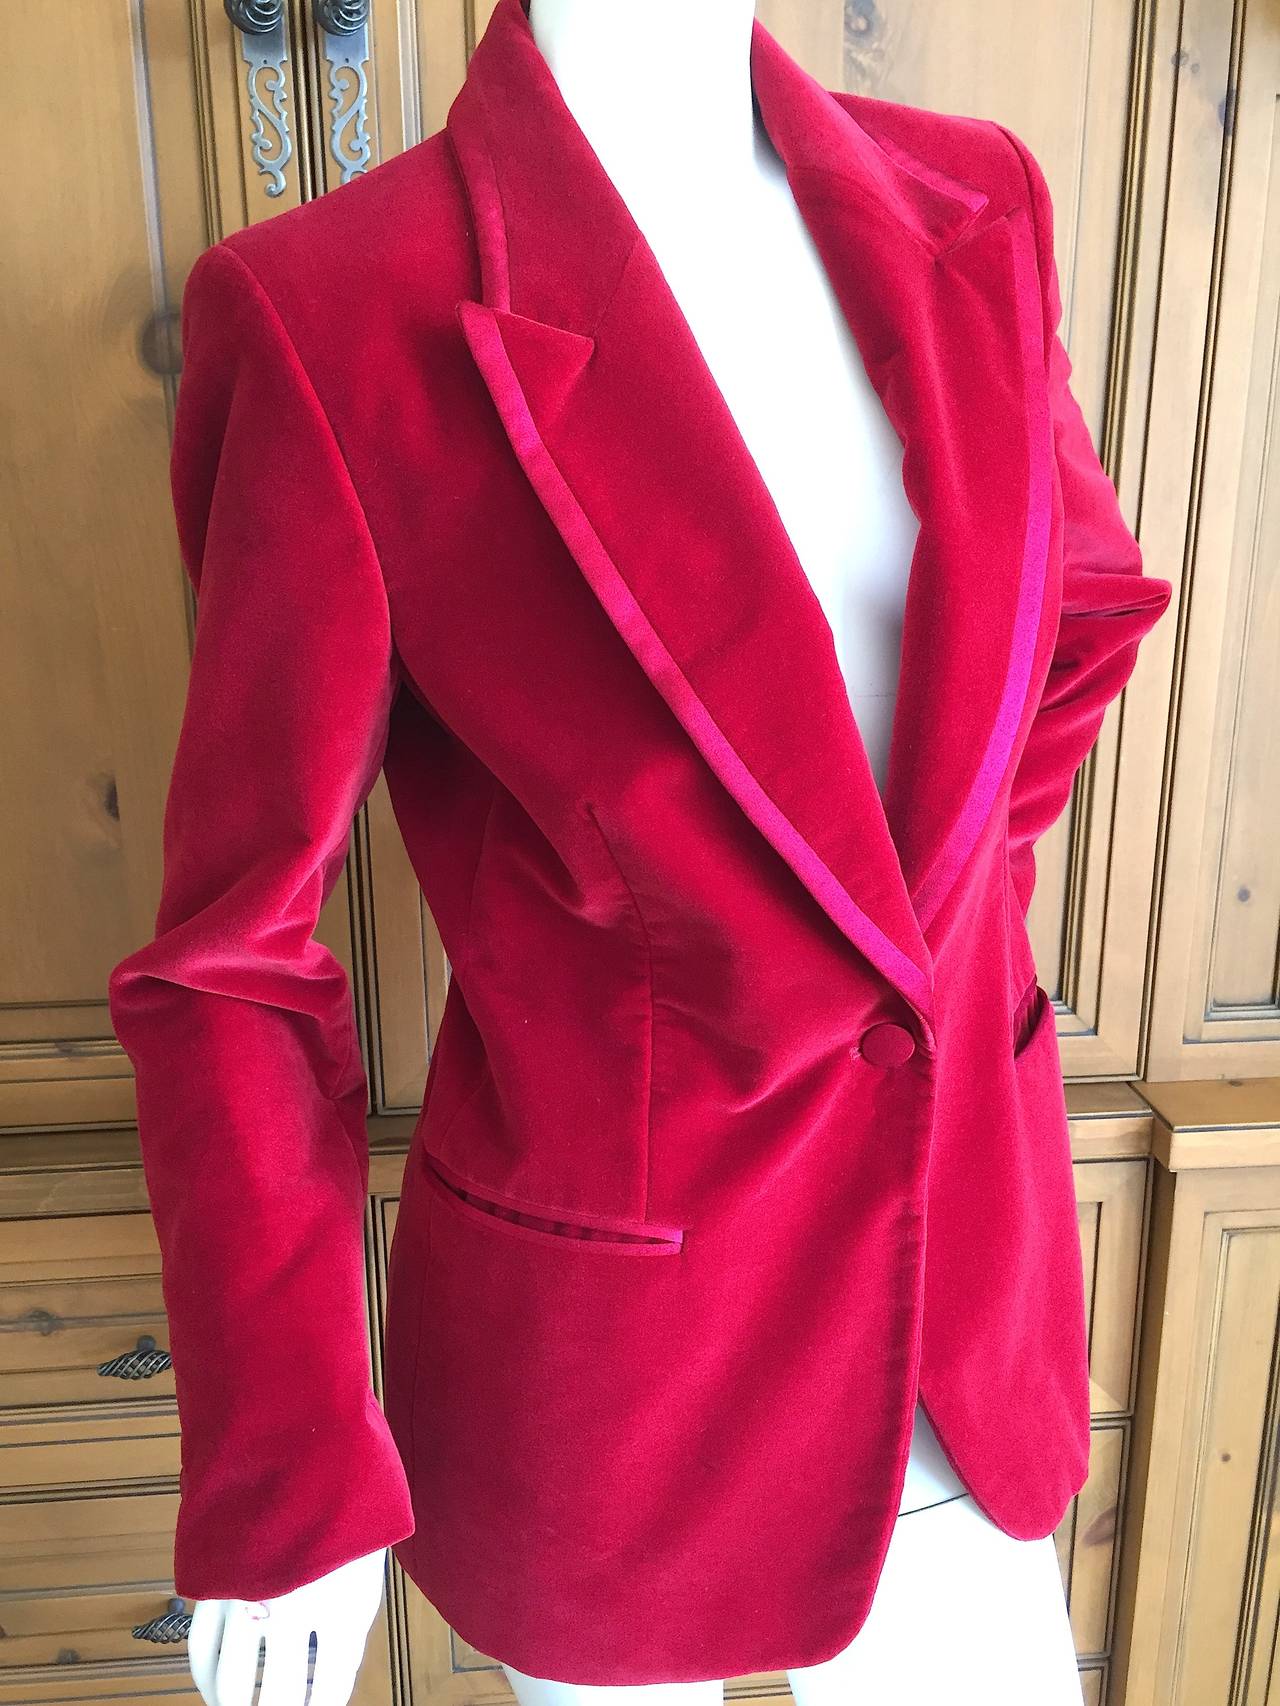 Gucci by Tom Ford Red Velvet Tuxedo Jacket 

This was the ad campaign , then immortalized by Gwyneth Paltrow in 1996

Jacket is marked sz 42 but runs small

BUST:	38